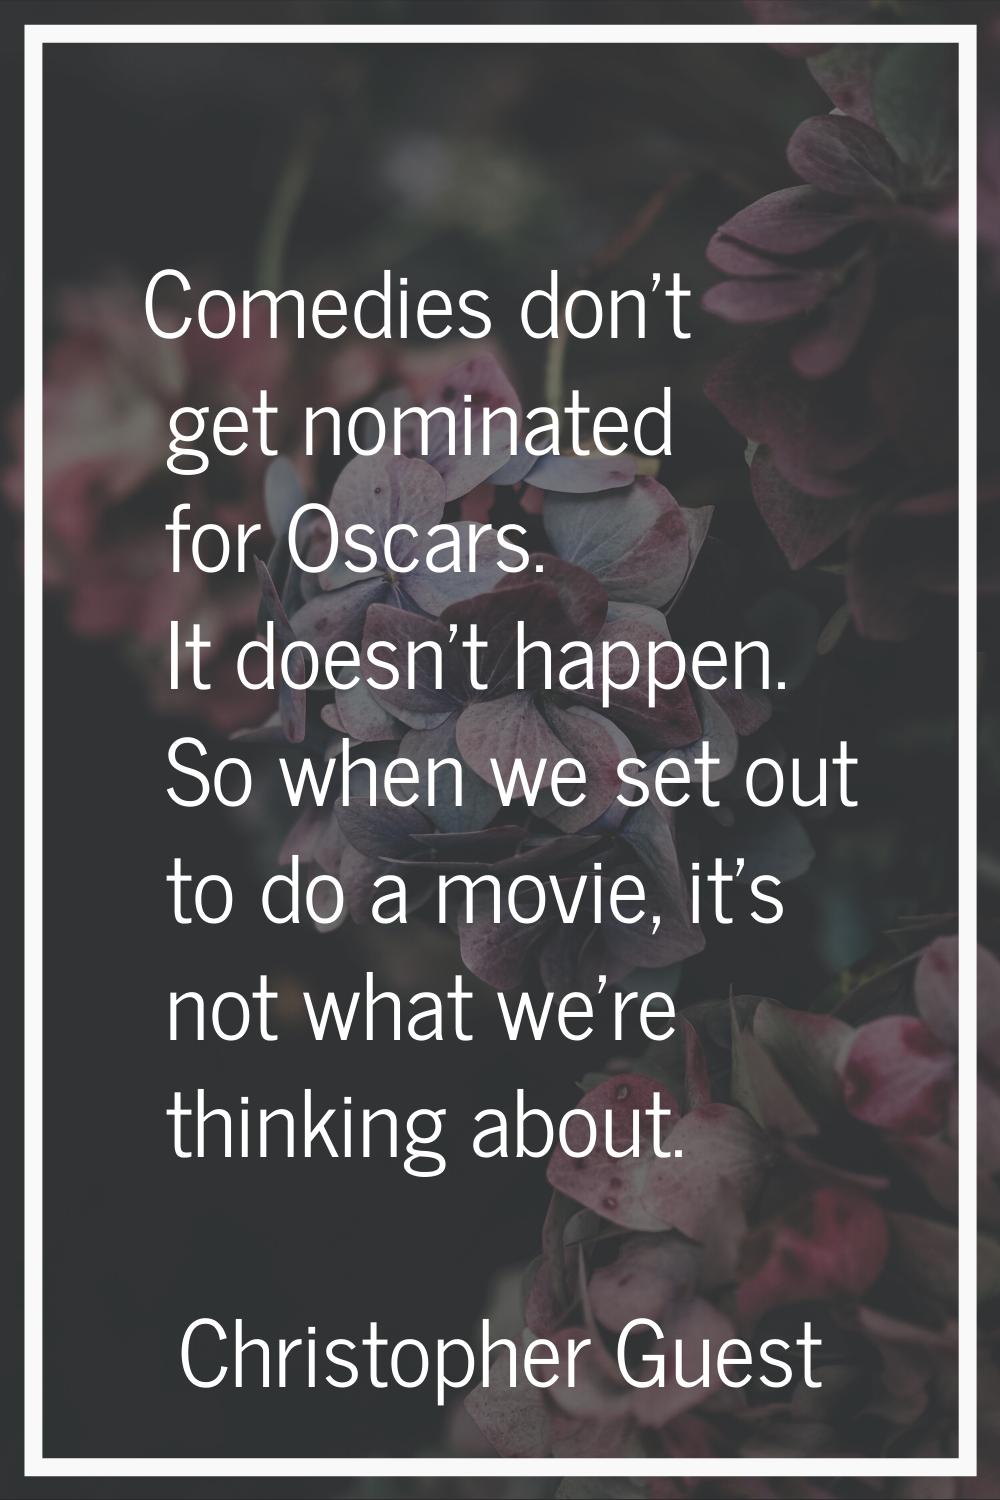 Comedies don't get nominated for Oscars. It doesn't happen. So when we set out to do a movie, it's 